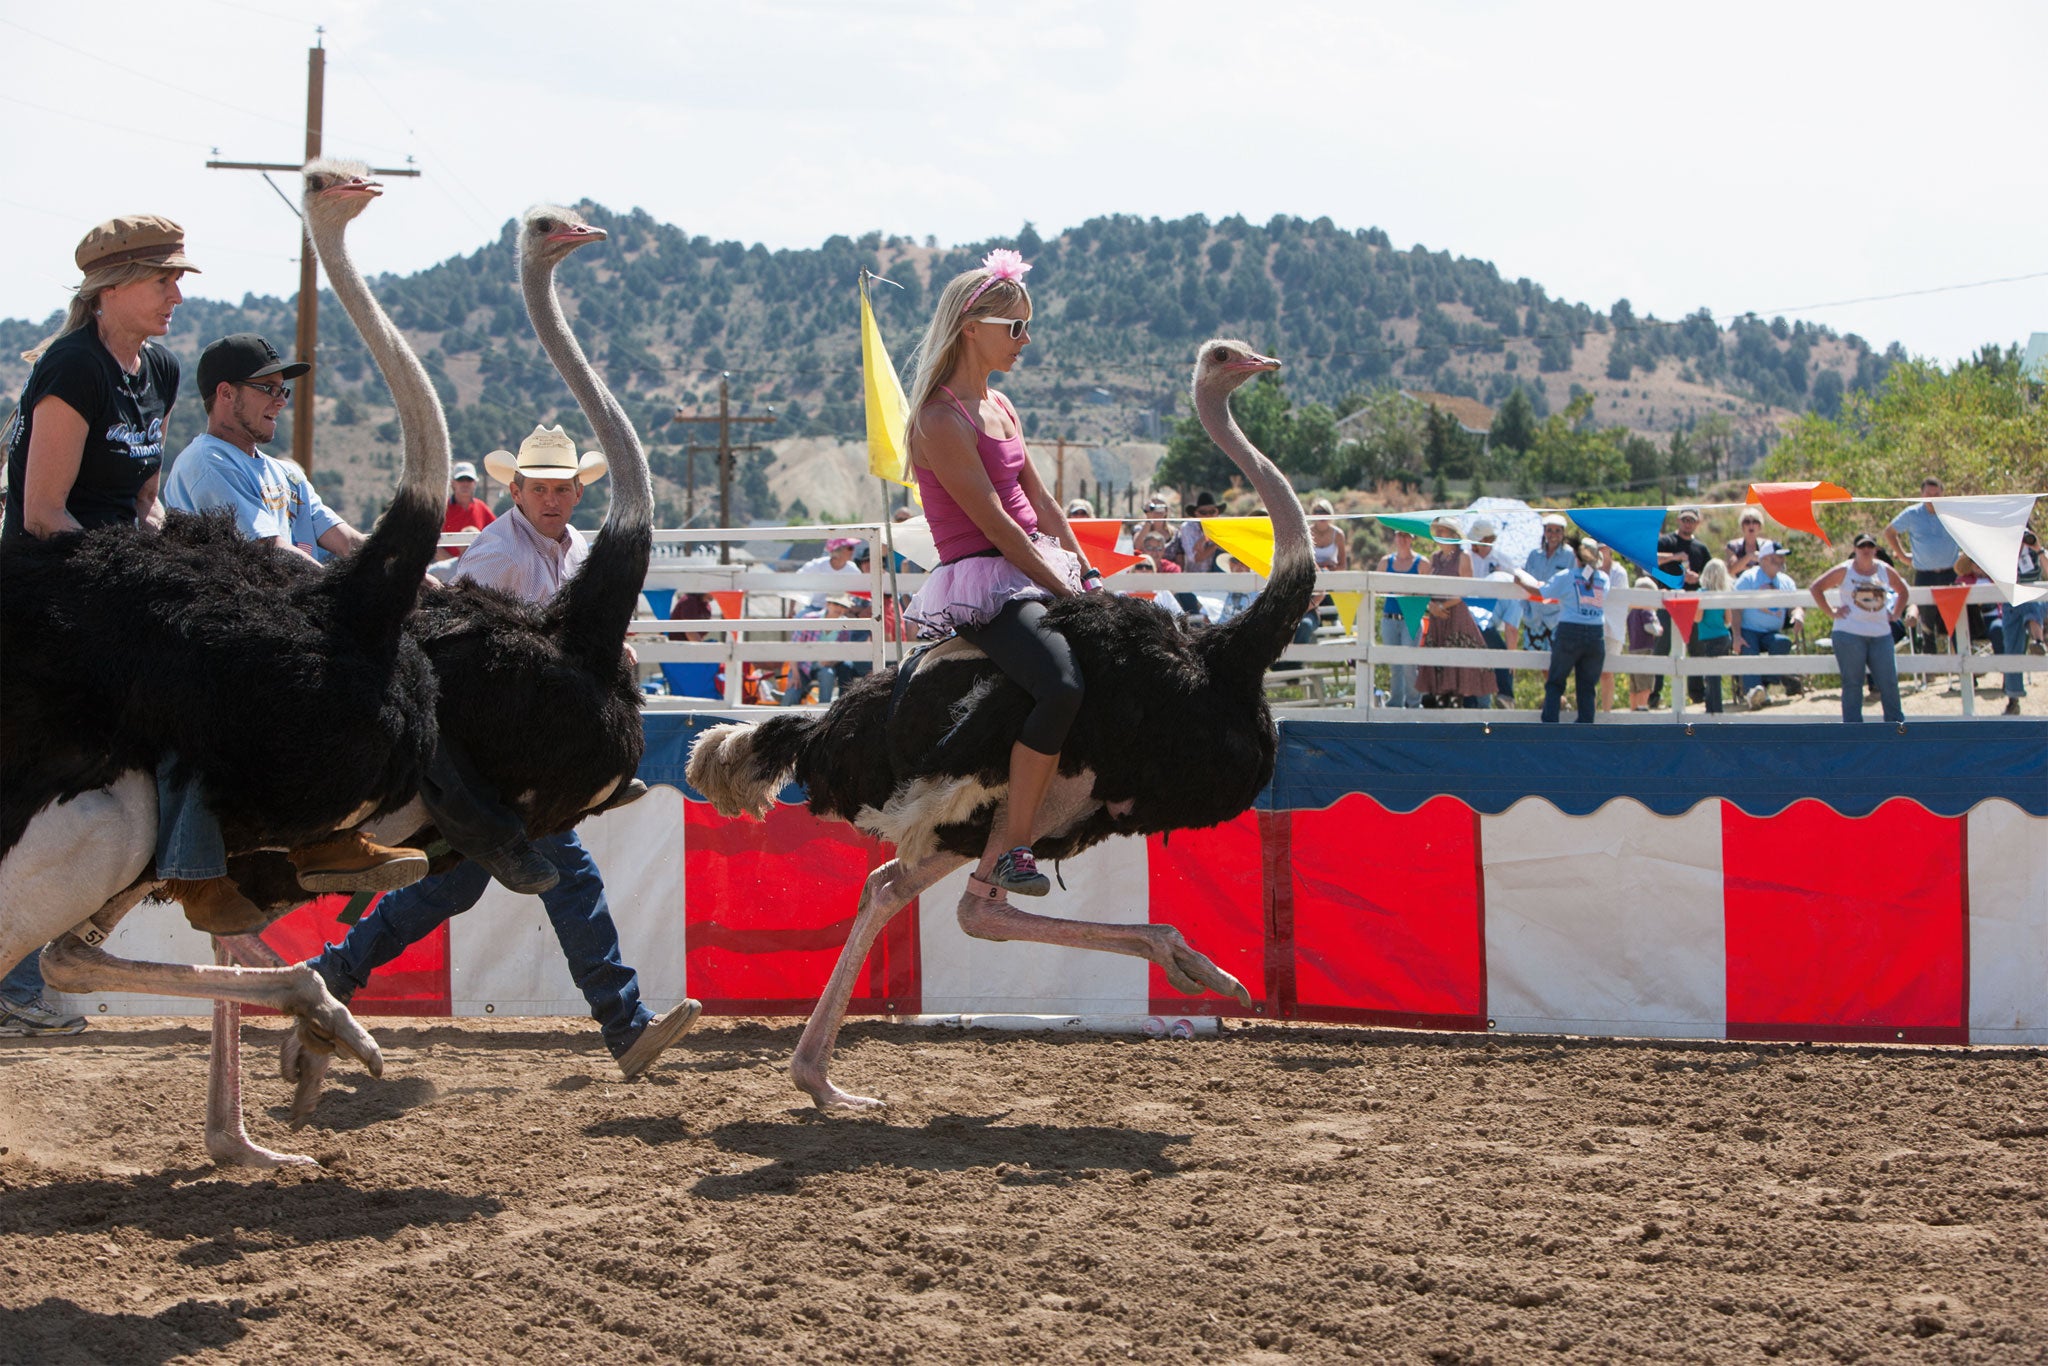 The Virginia City camel race now includes ostrich and zebra races